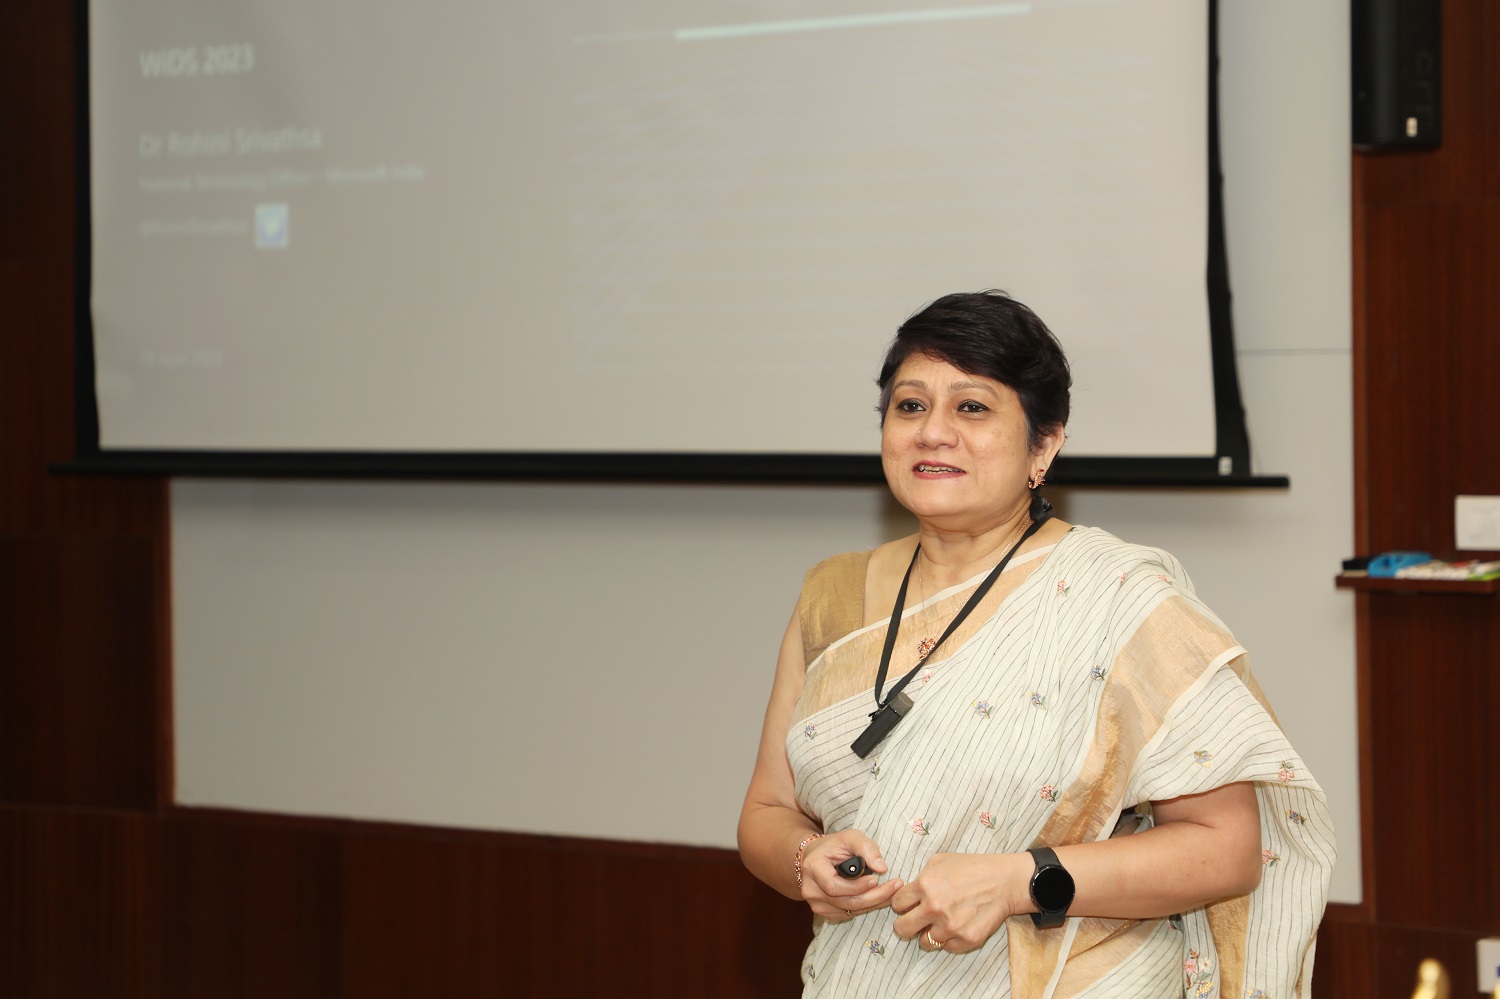 Dr. Rohini Srivathsa, National Technology Officer, Microsoft, delivers the keynote address on 'Demystifying Generative AI' at Women in Data Science Bangalore Conference 2023.